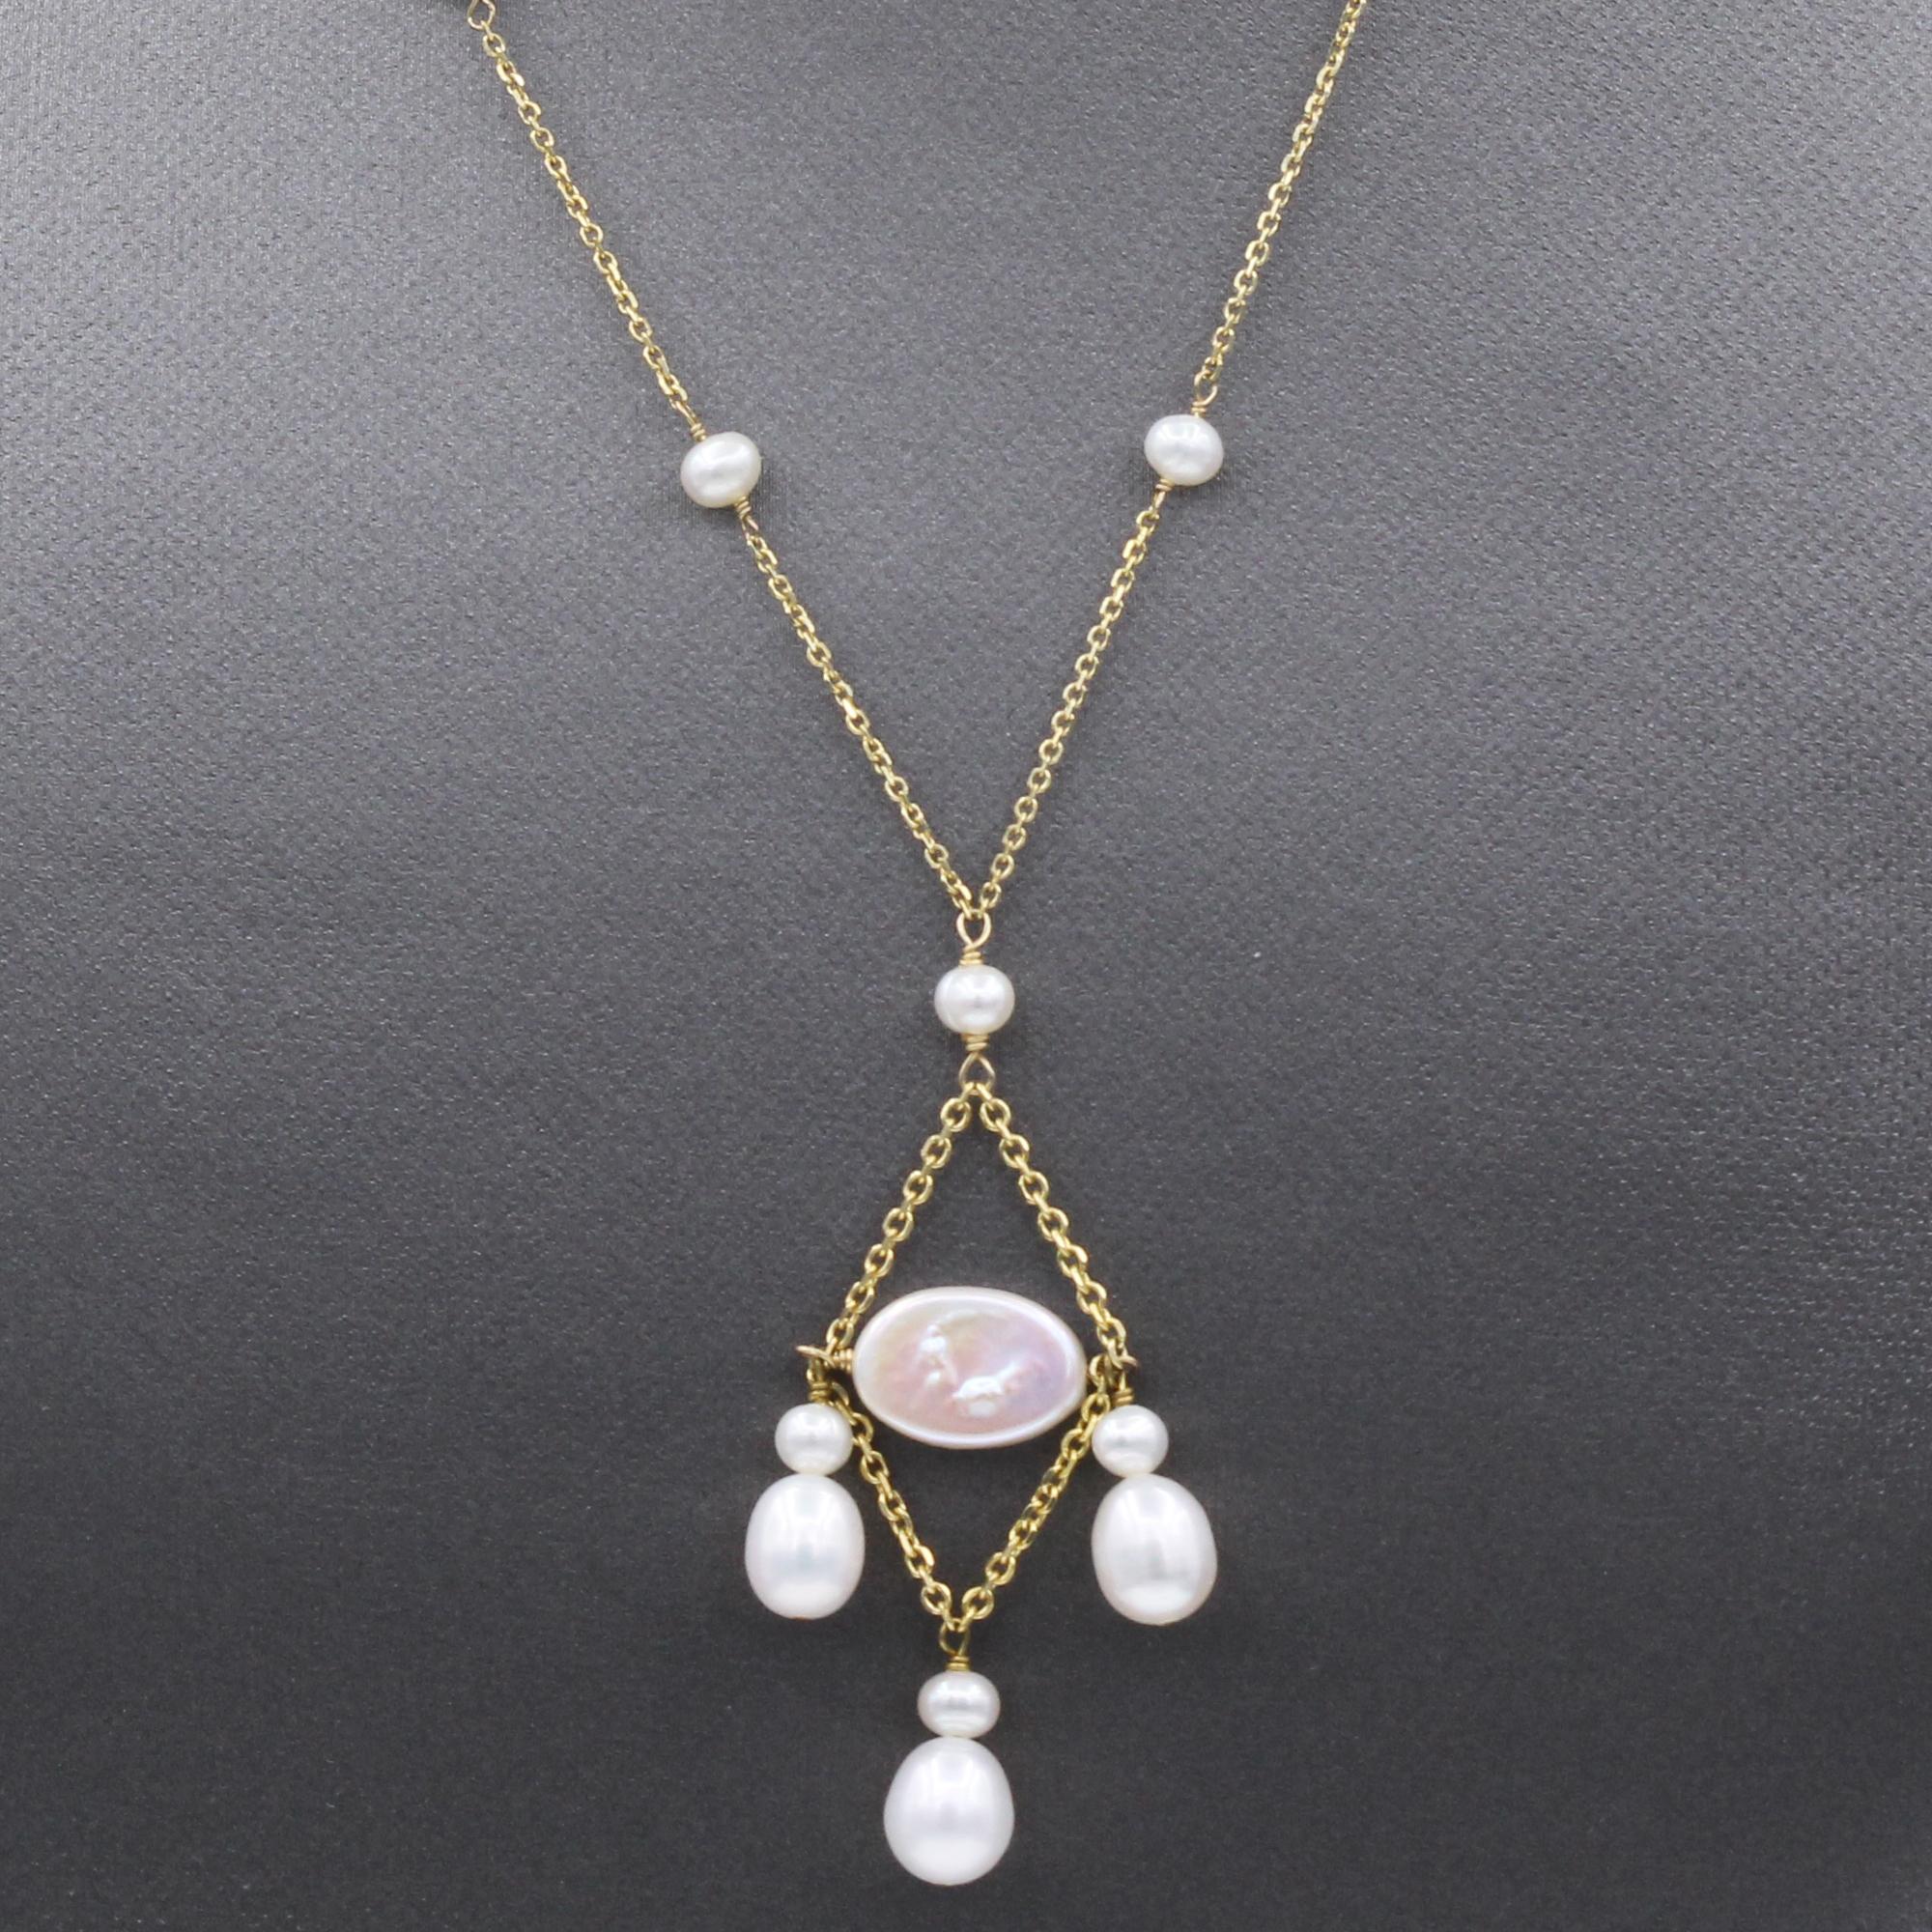 Elegant Pearl Necklace
Dangling wire Style
14k Yellow Gold
Small fresh water Pearls all around approx.  3- 4 mm 
Dangling fresh water Pearls approx. 8 mm
Necklace Length  16.5’ Inch
Dangle Length approx. 2’ inch
Spring Ring Lock
Total weight 5.20